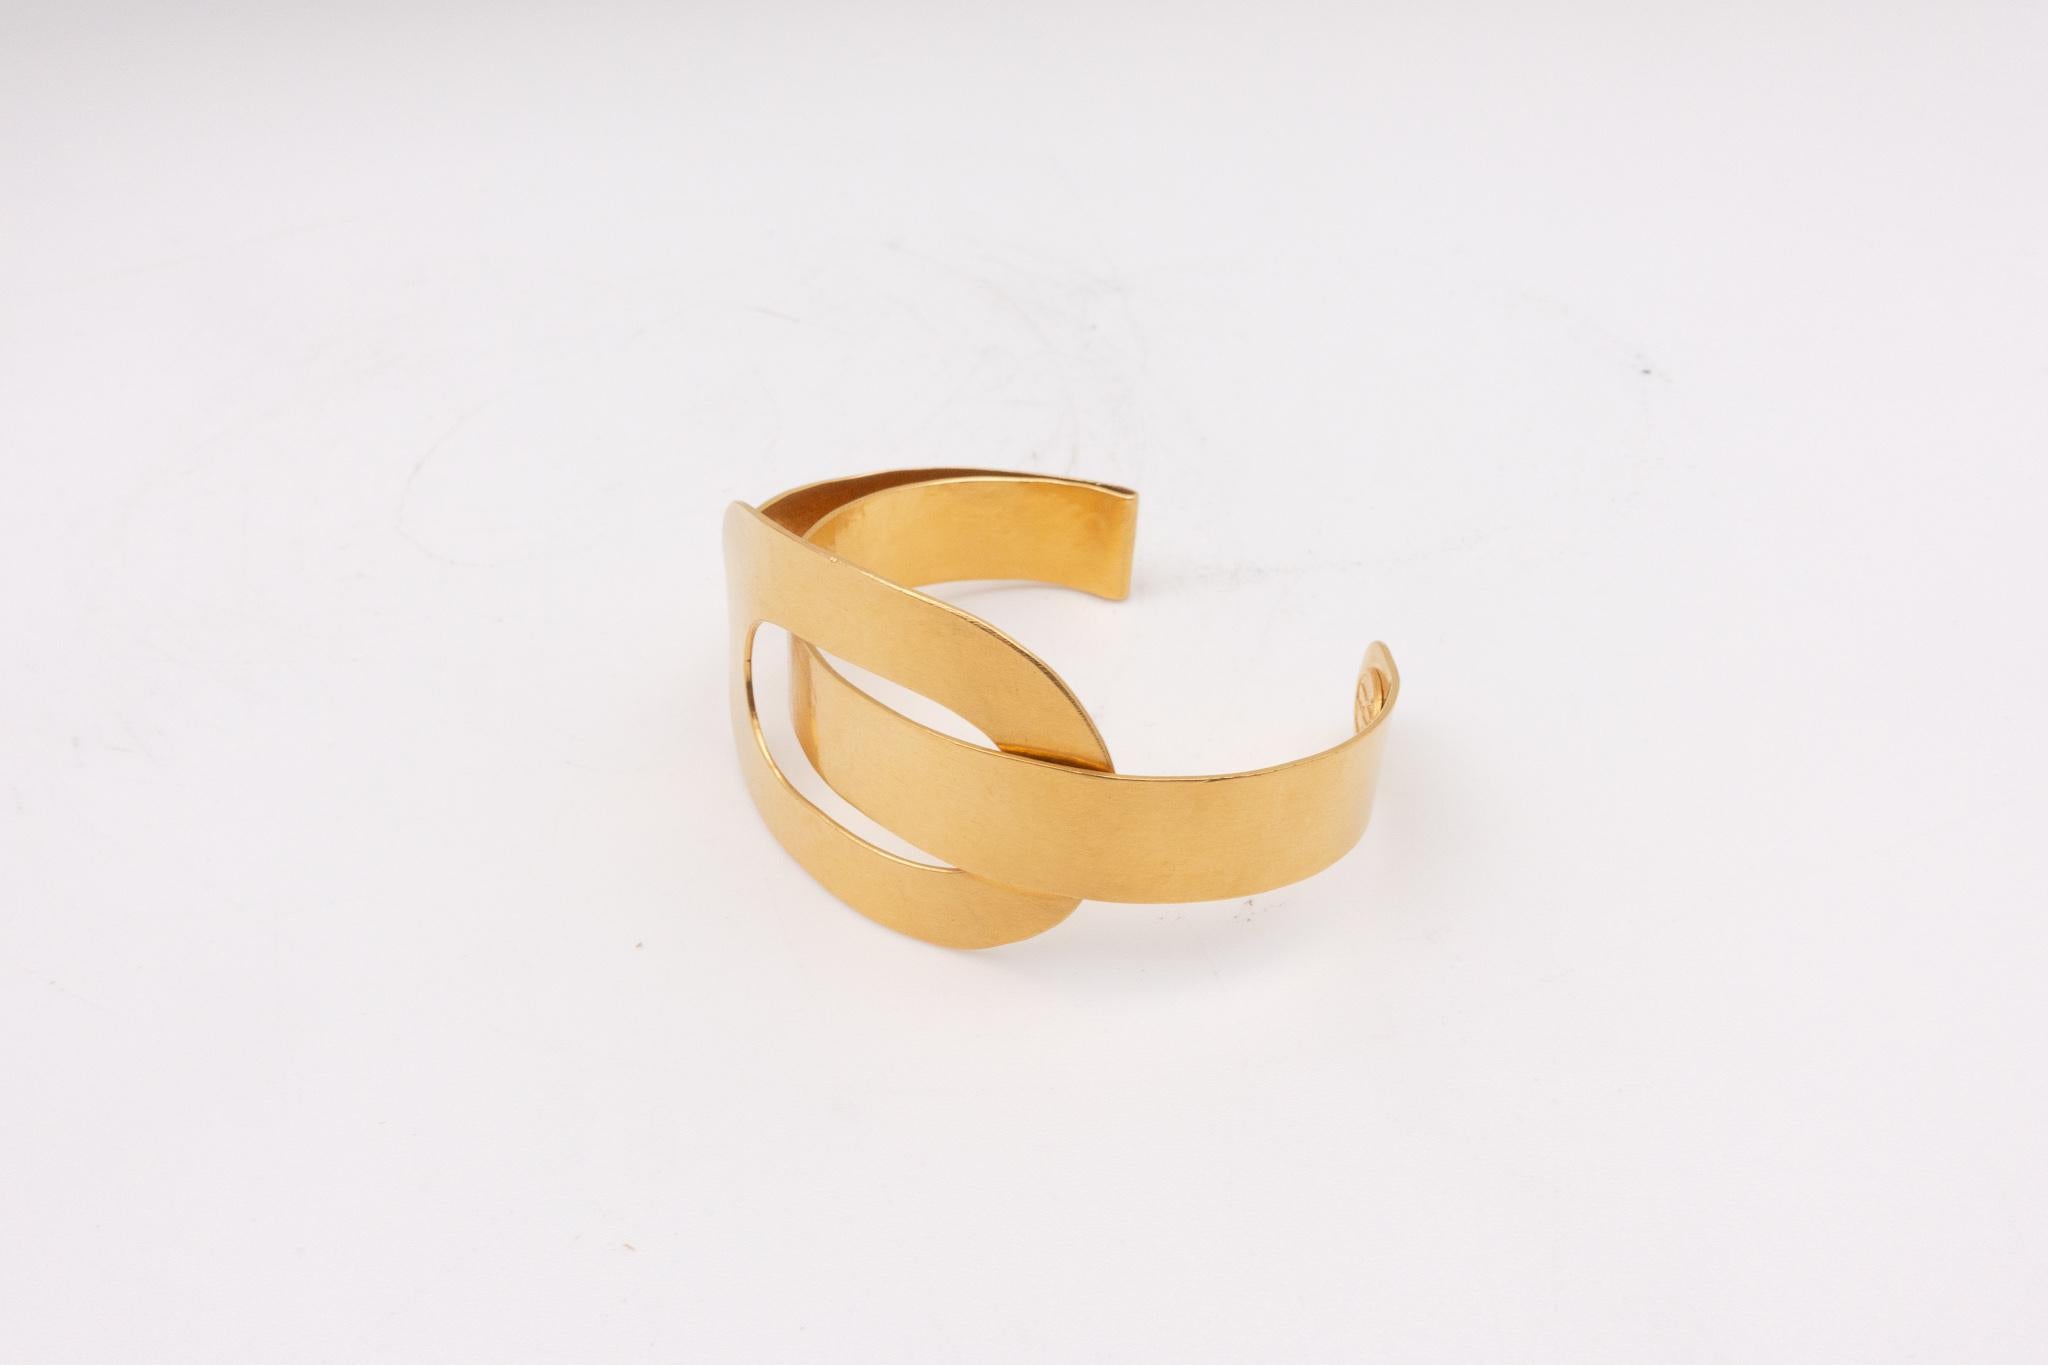 Highly collectable Herve Van Der Straeten hammered gold plated brass bracelet. Herve Van Der Straeten has discontinued making jewelry to focus more on his furniture line. His pieces have been collected the world over for decades. This is truly one